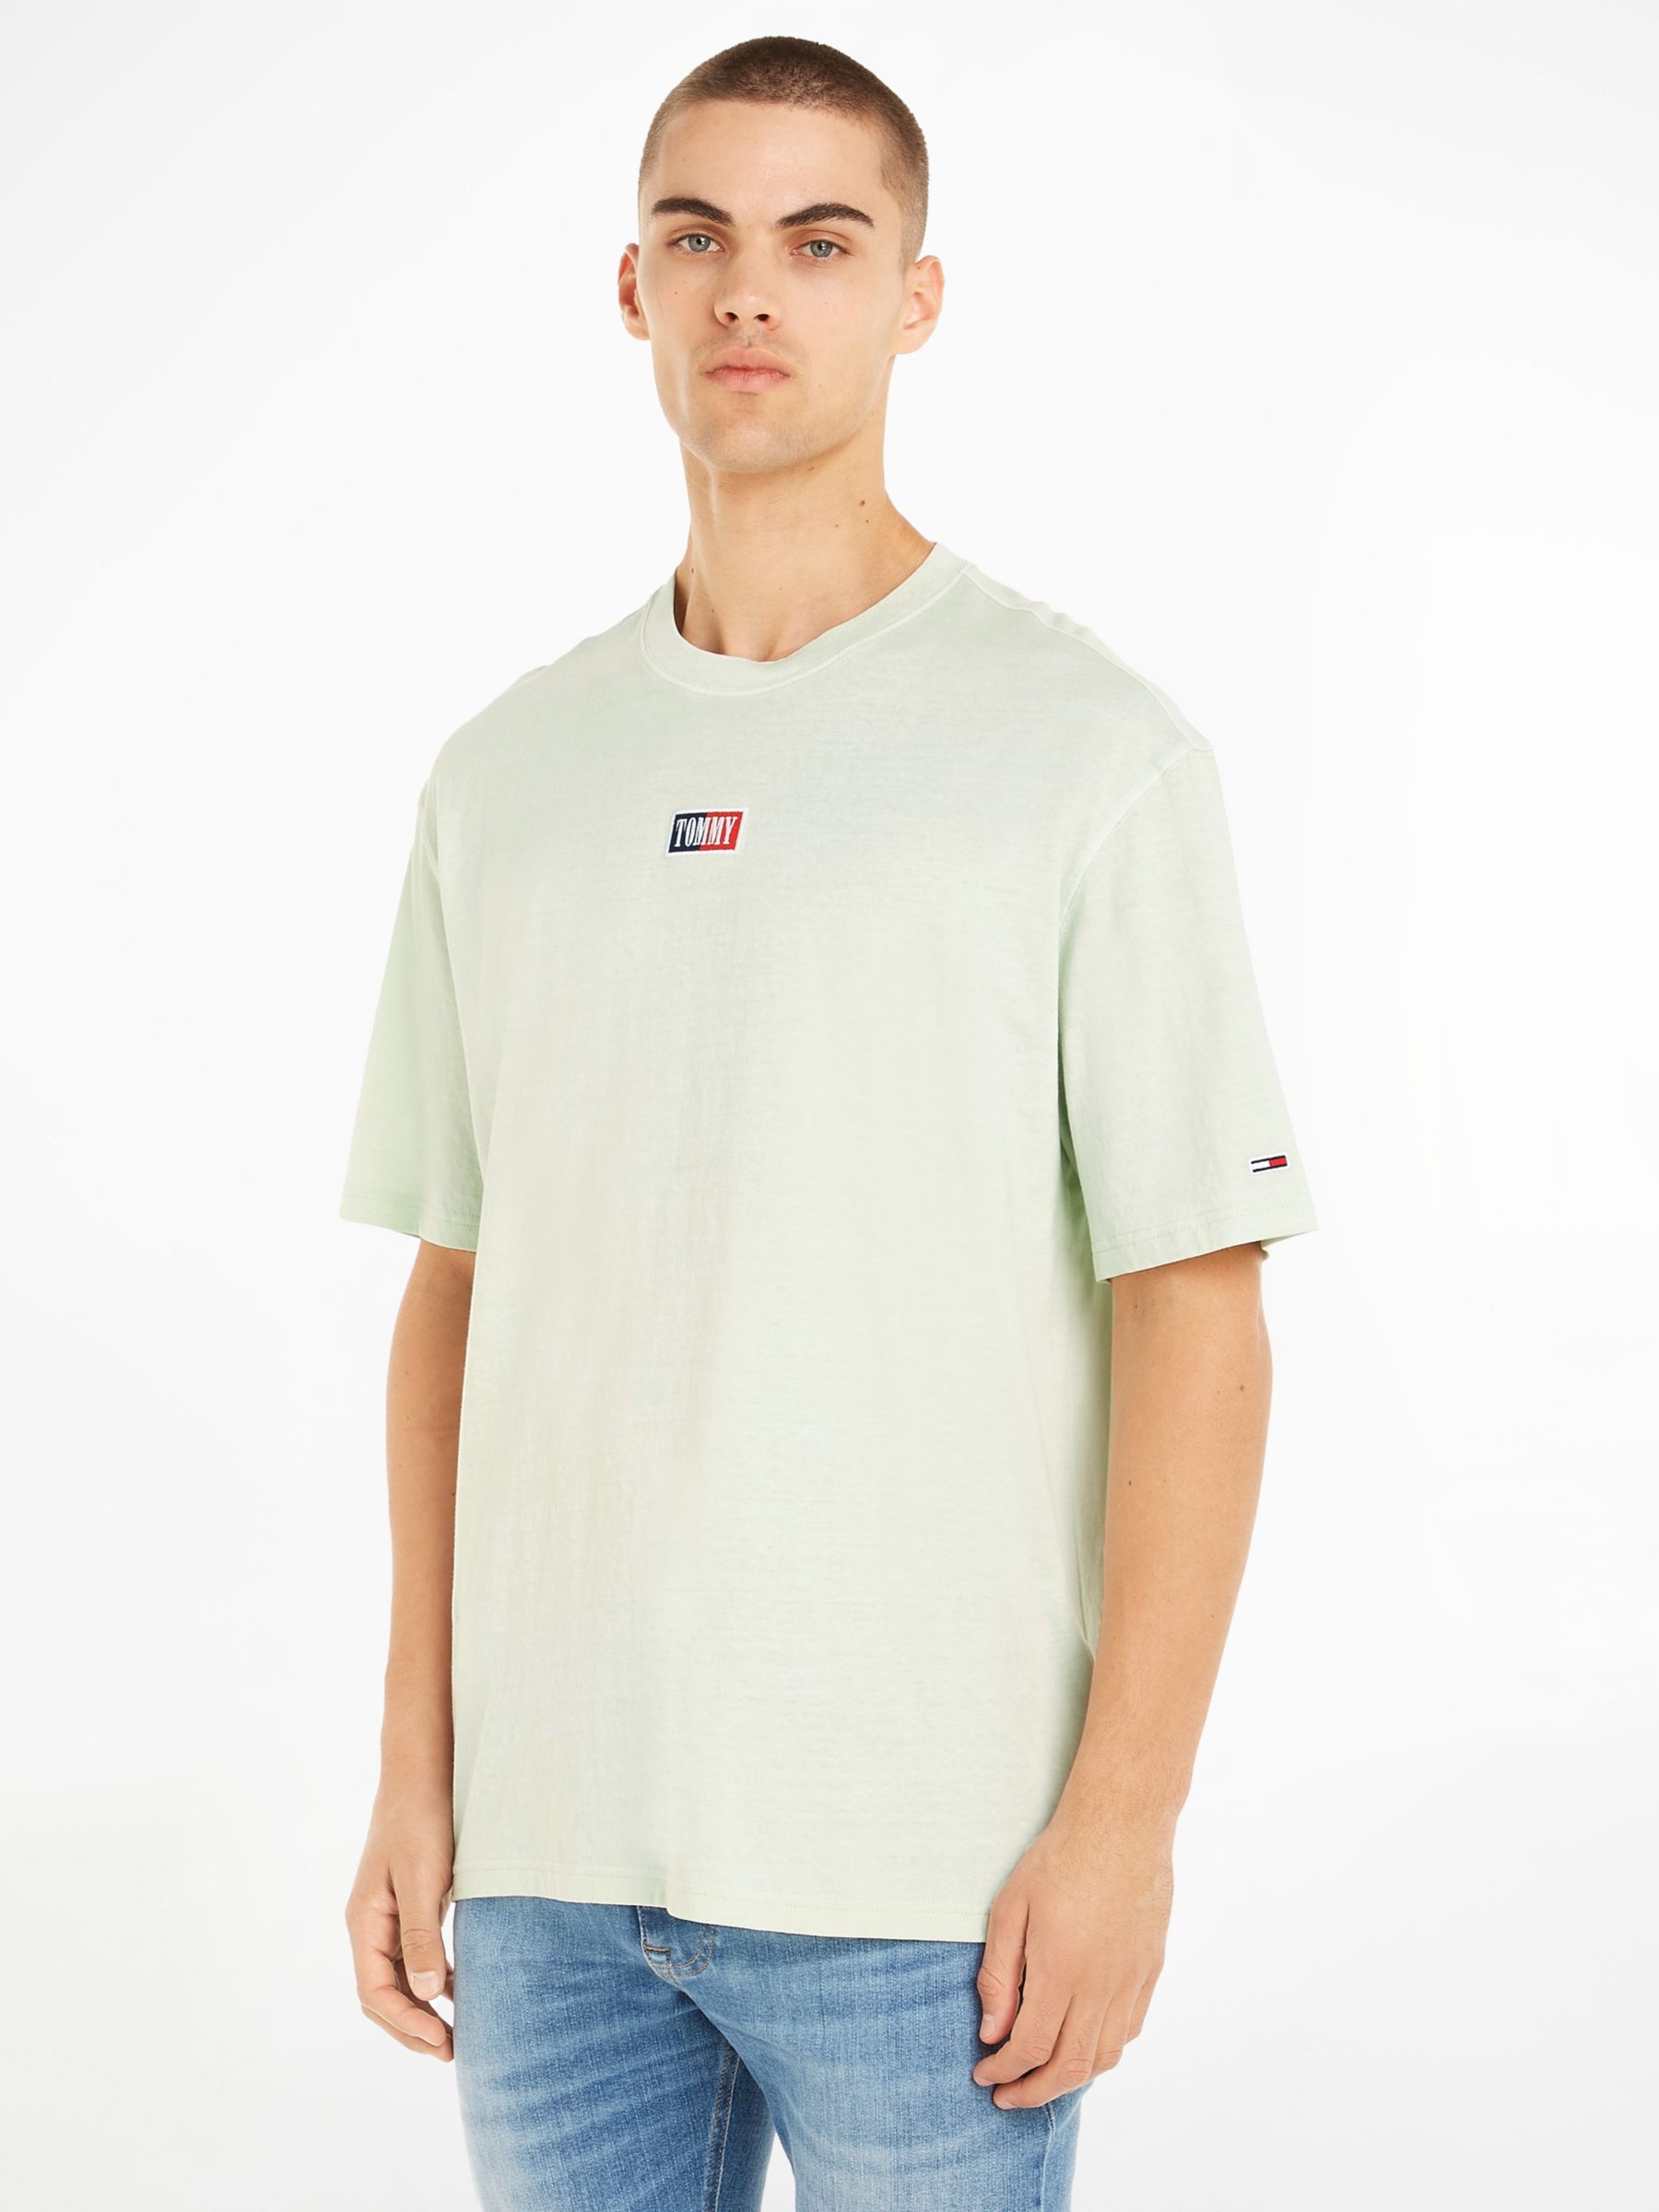 Tommy Jeans Logo Skate T-Shirt, Minty at John Lewis & Partners